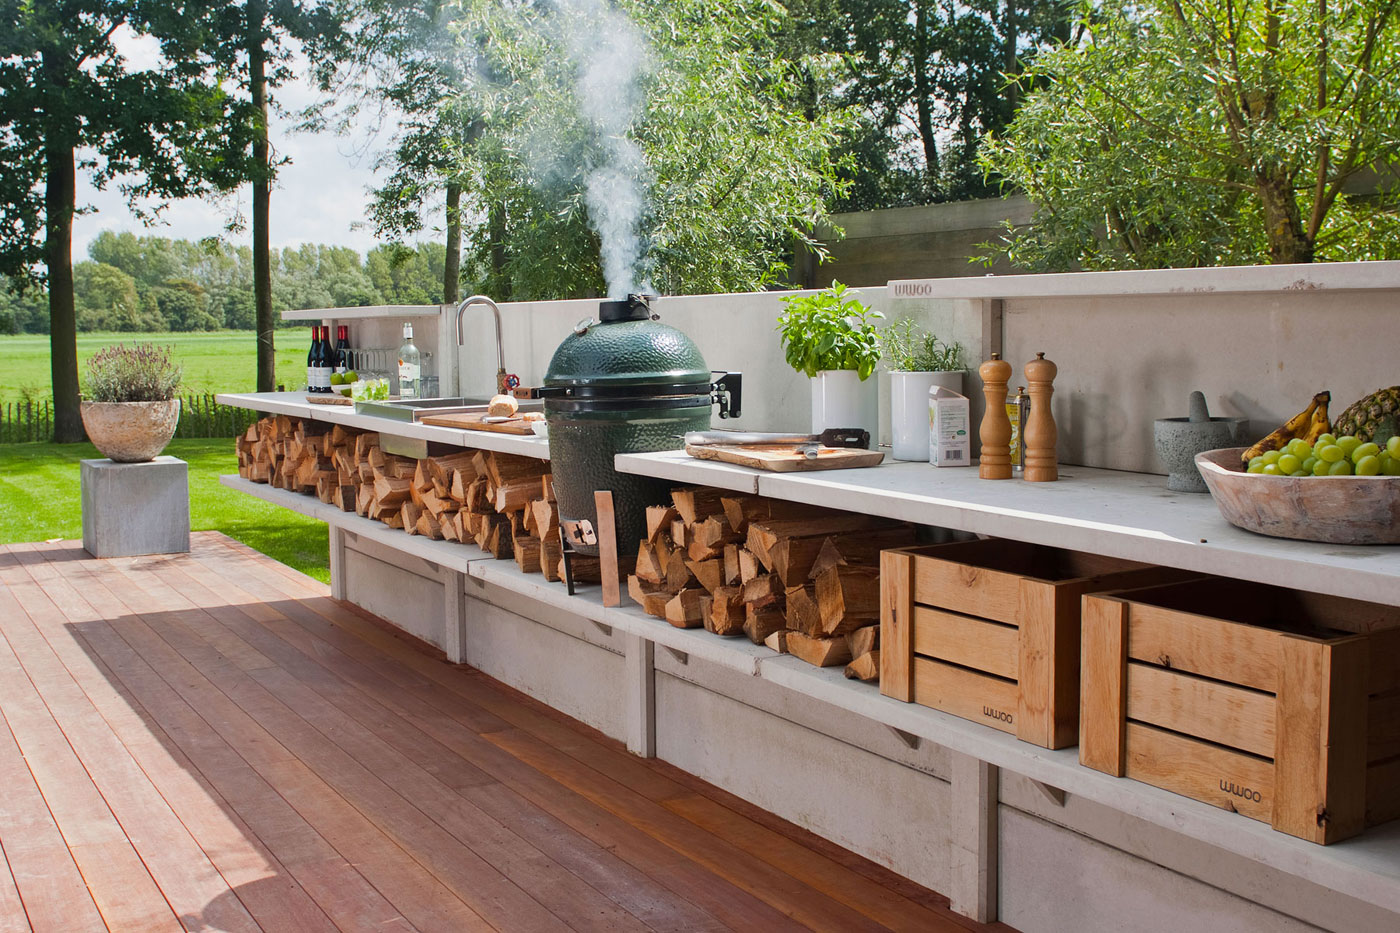 15 best outdoor kitchen ideas and designs - pictures of beautiful outdoor  kitchens QUWWJYE